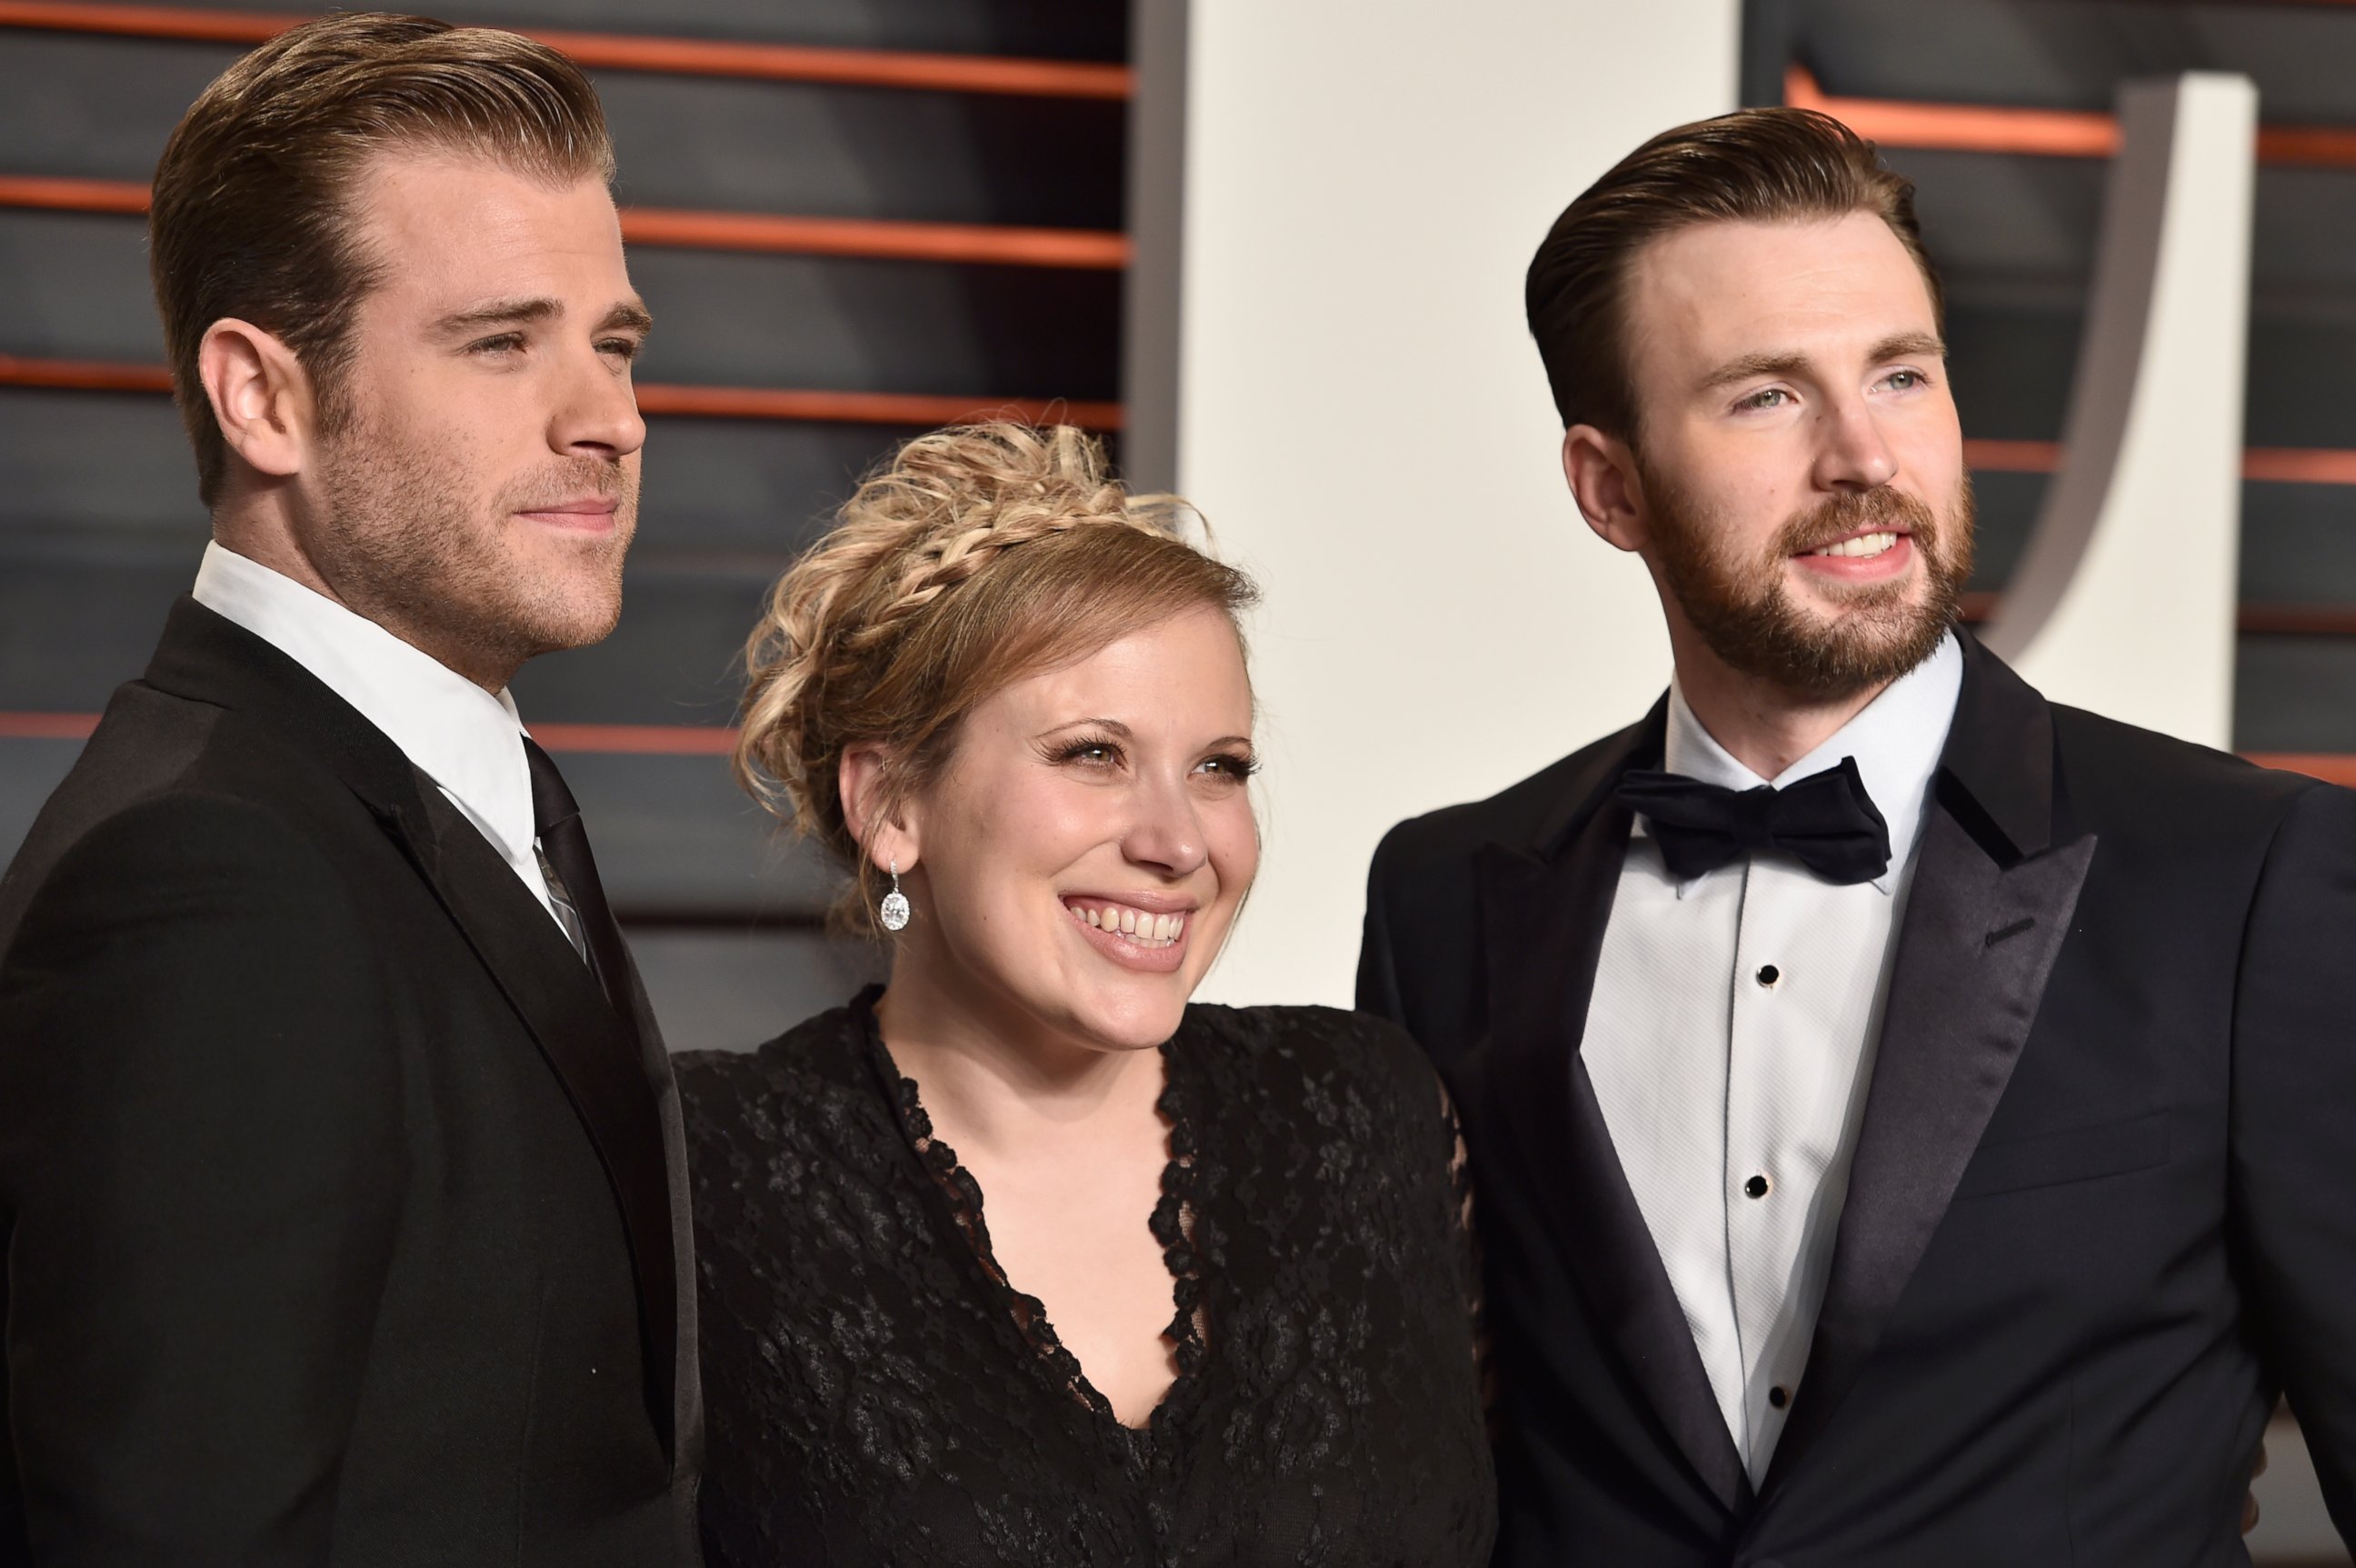 PHOTO: Scott Evans, Carly Evans and Chris Evans attend the 2016 Vanity Fair Oscar Party, Feb. 28, 2016, in Beverly Hills, California.  